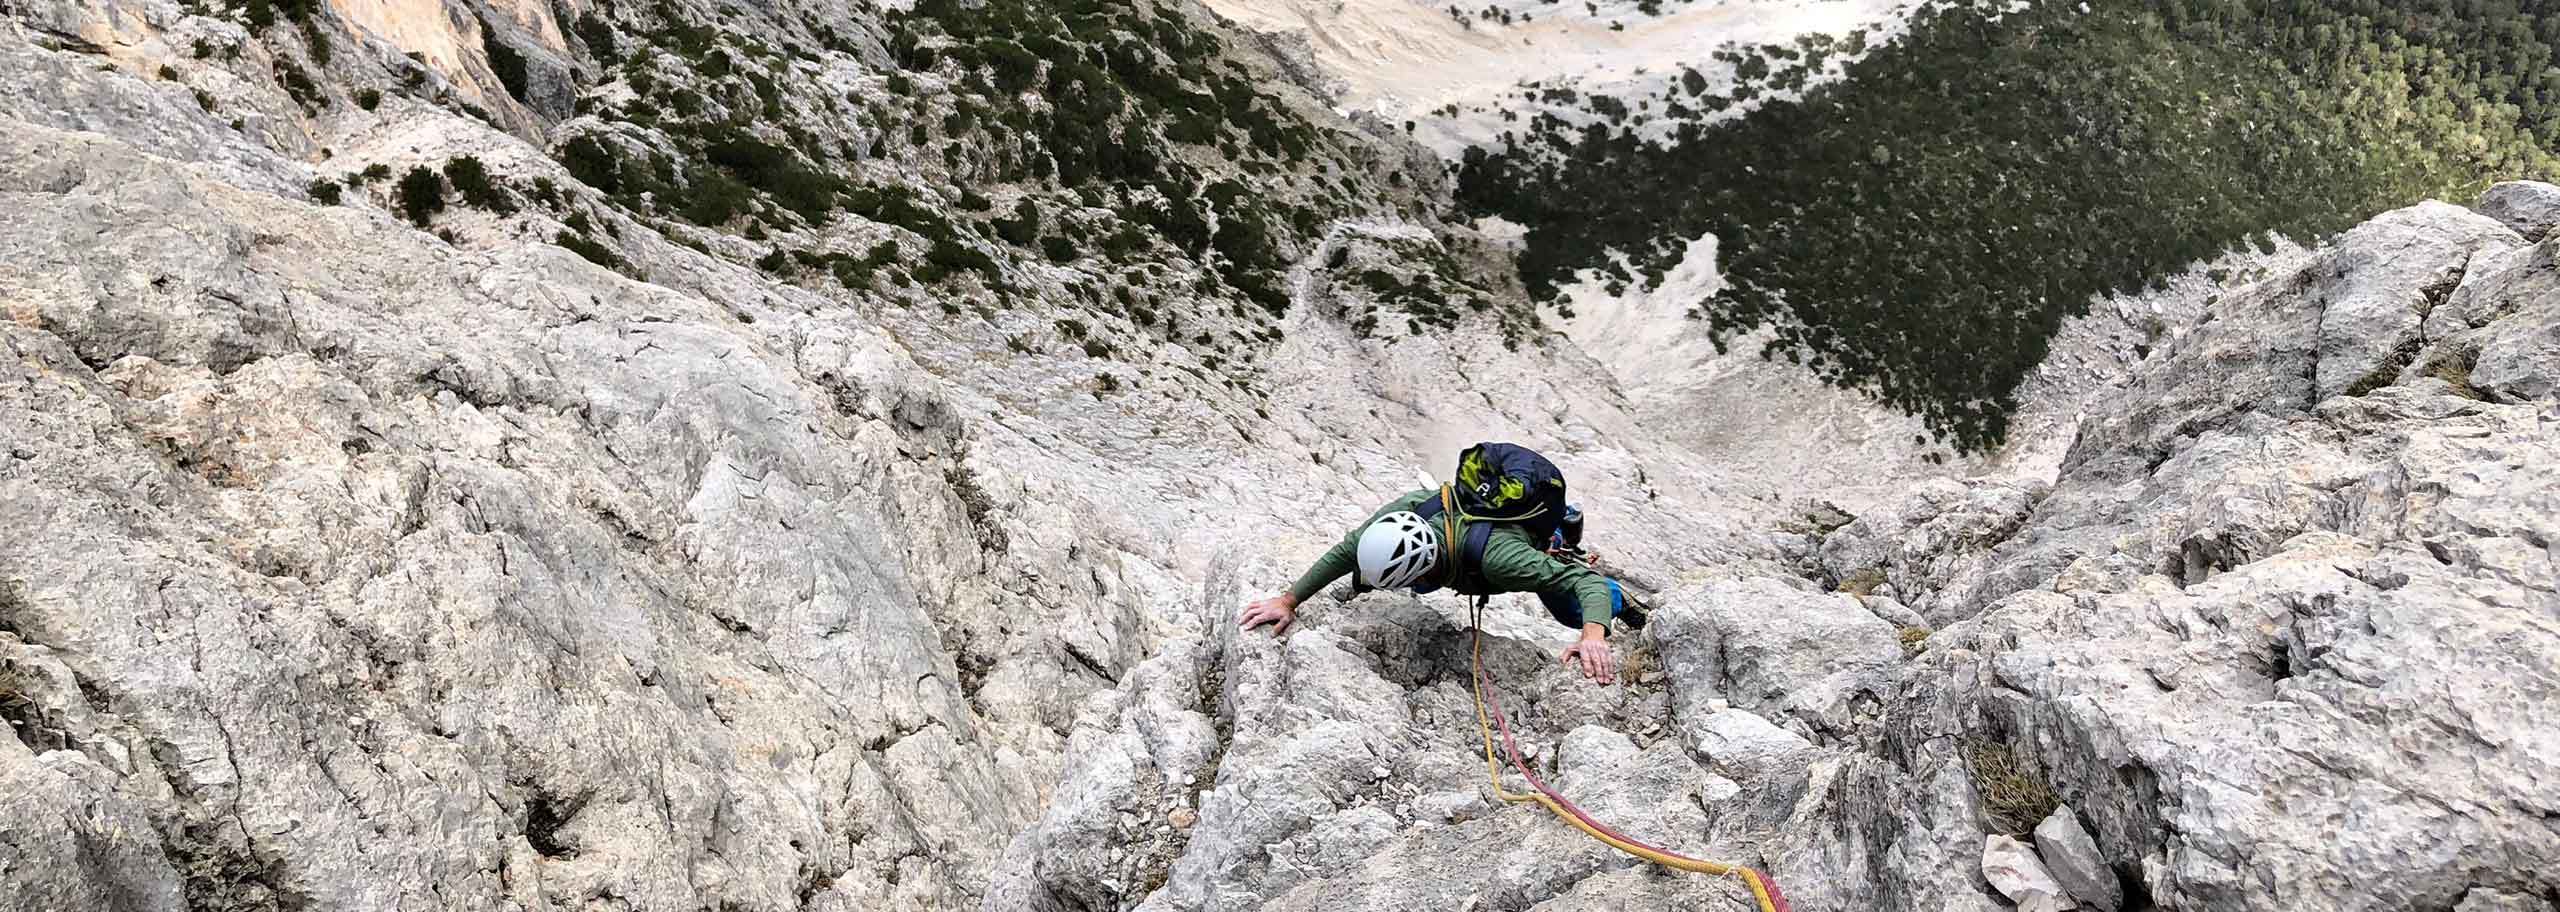 Dolomites Rock Climbing, Trad and Sport Climbing Experience